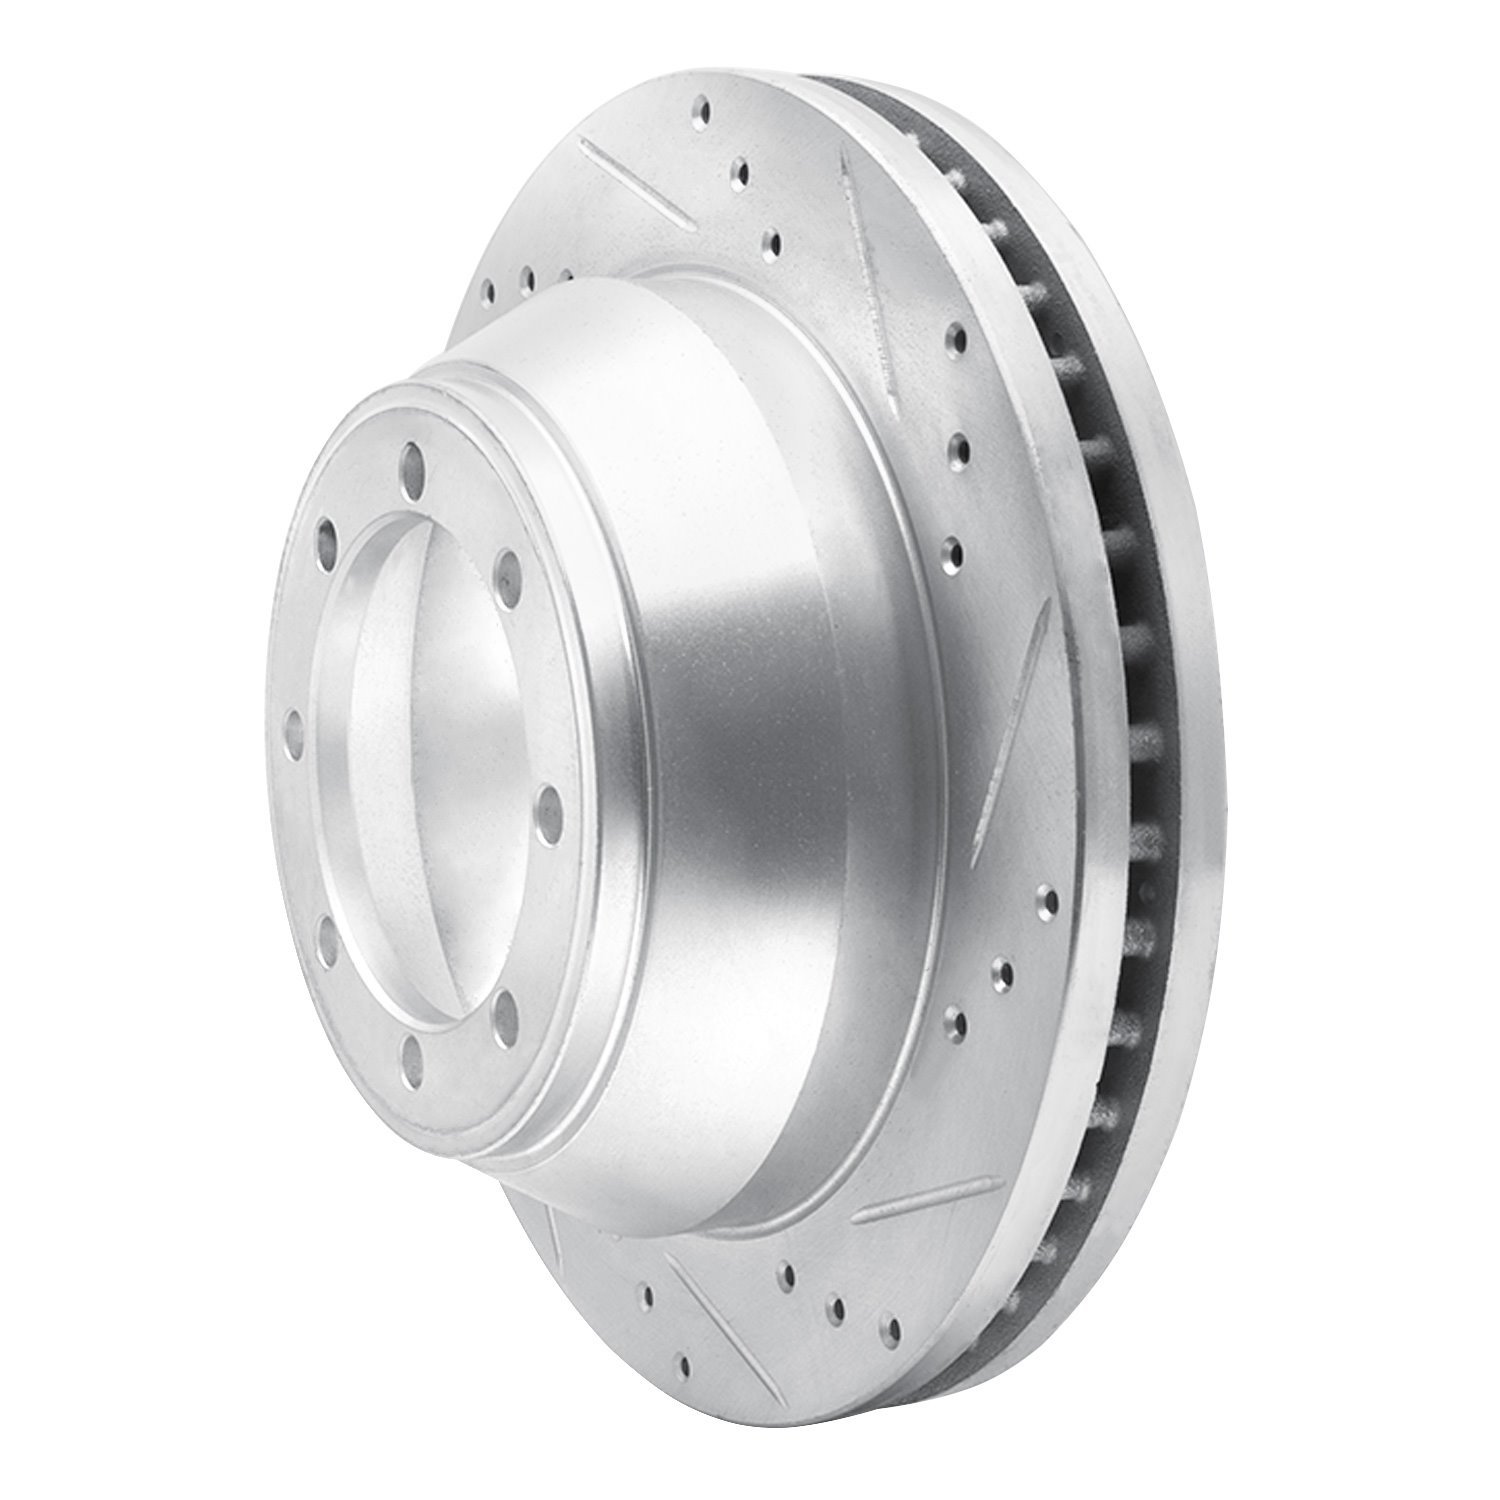 E-Line Drilled & Slotted Silver Brake Rotor, Fits Select Ford/Lincoln/Mercury/Mazda, Position: Rear Right